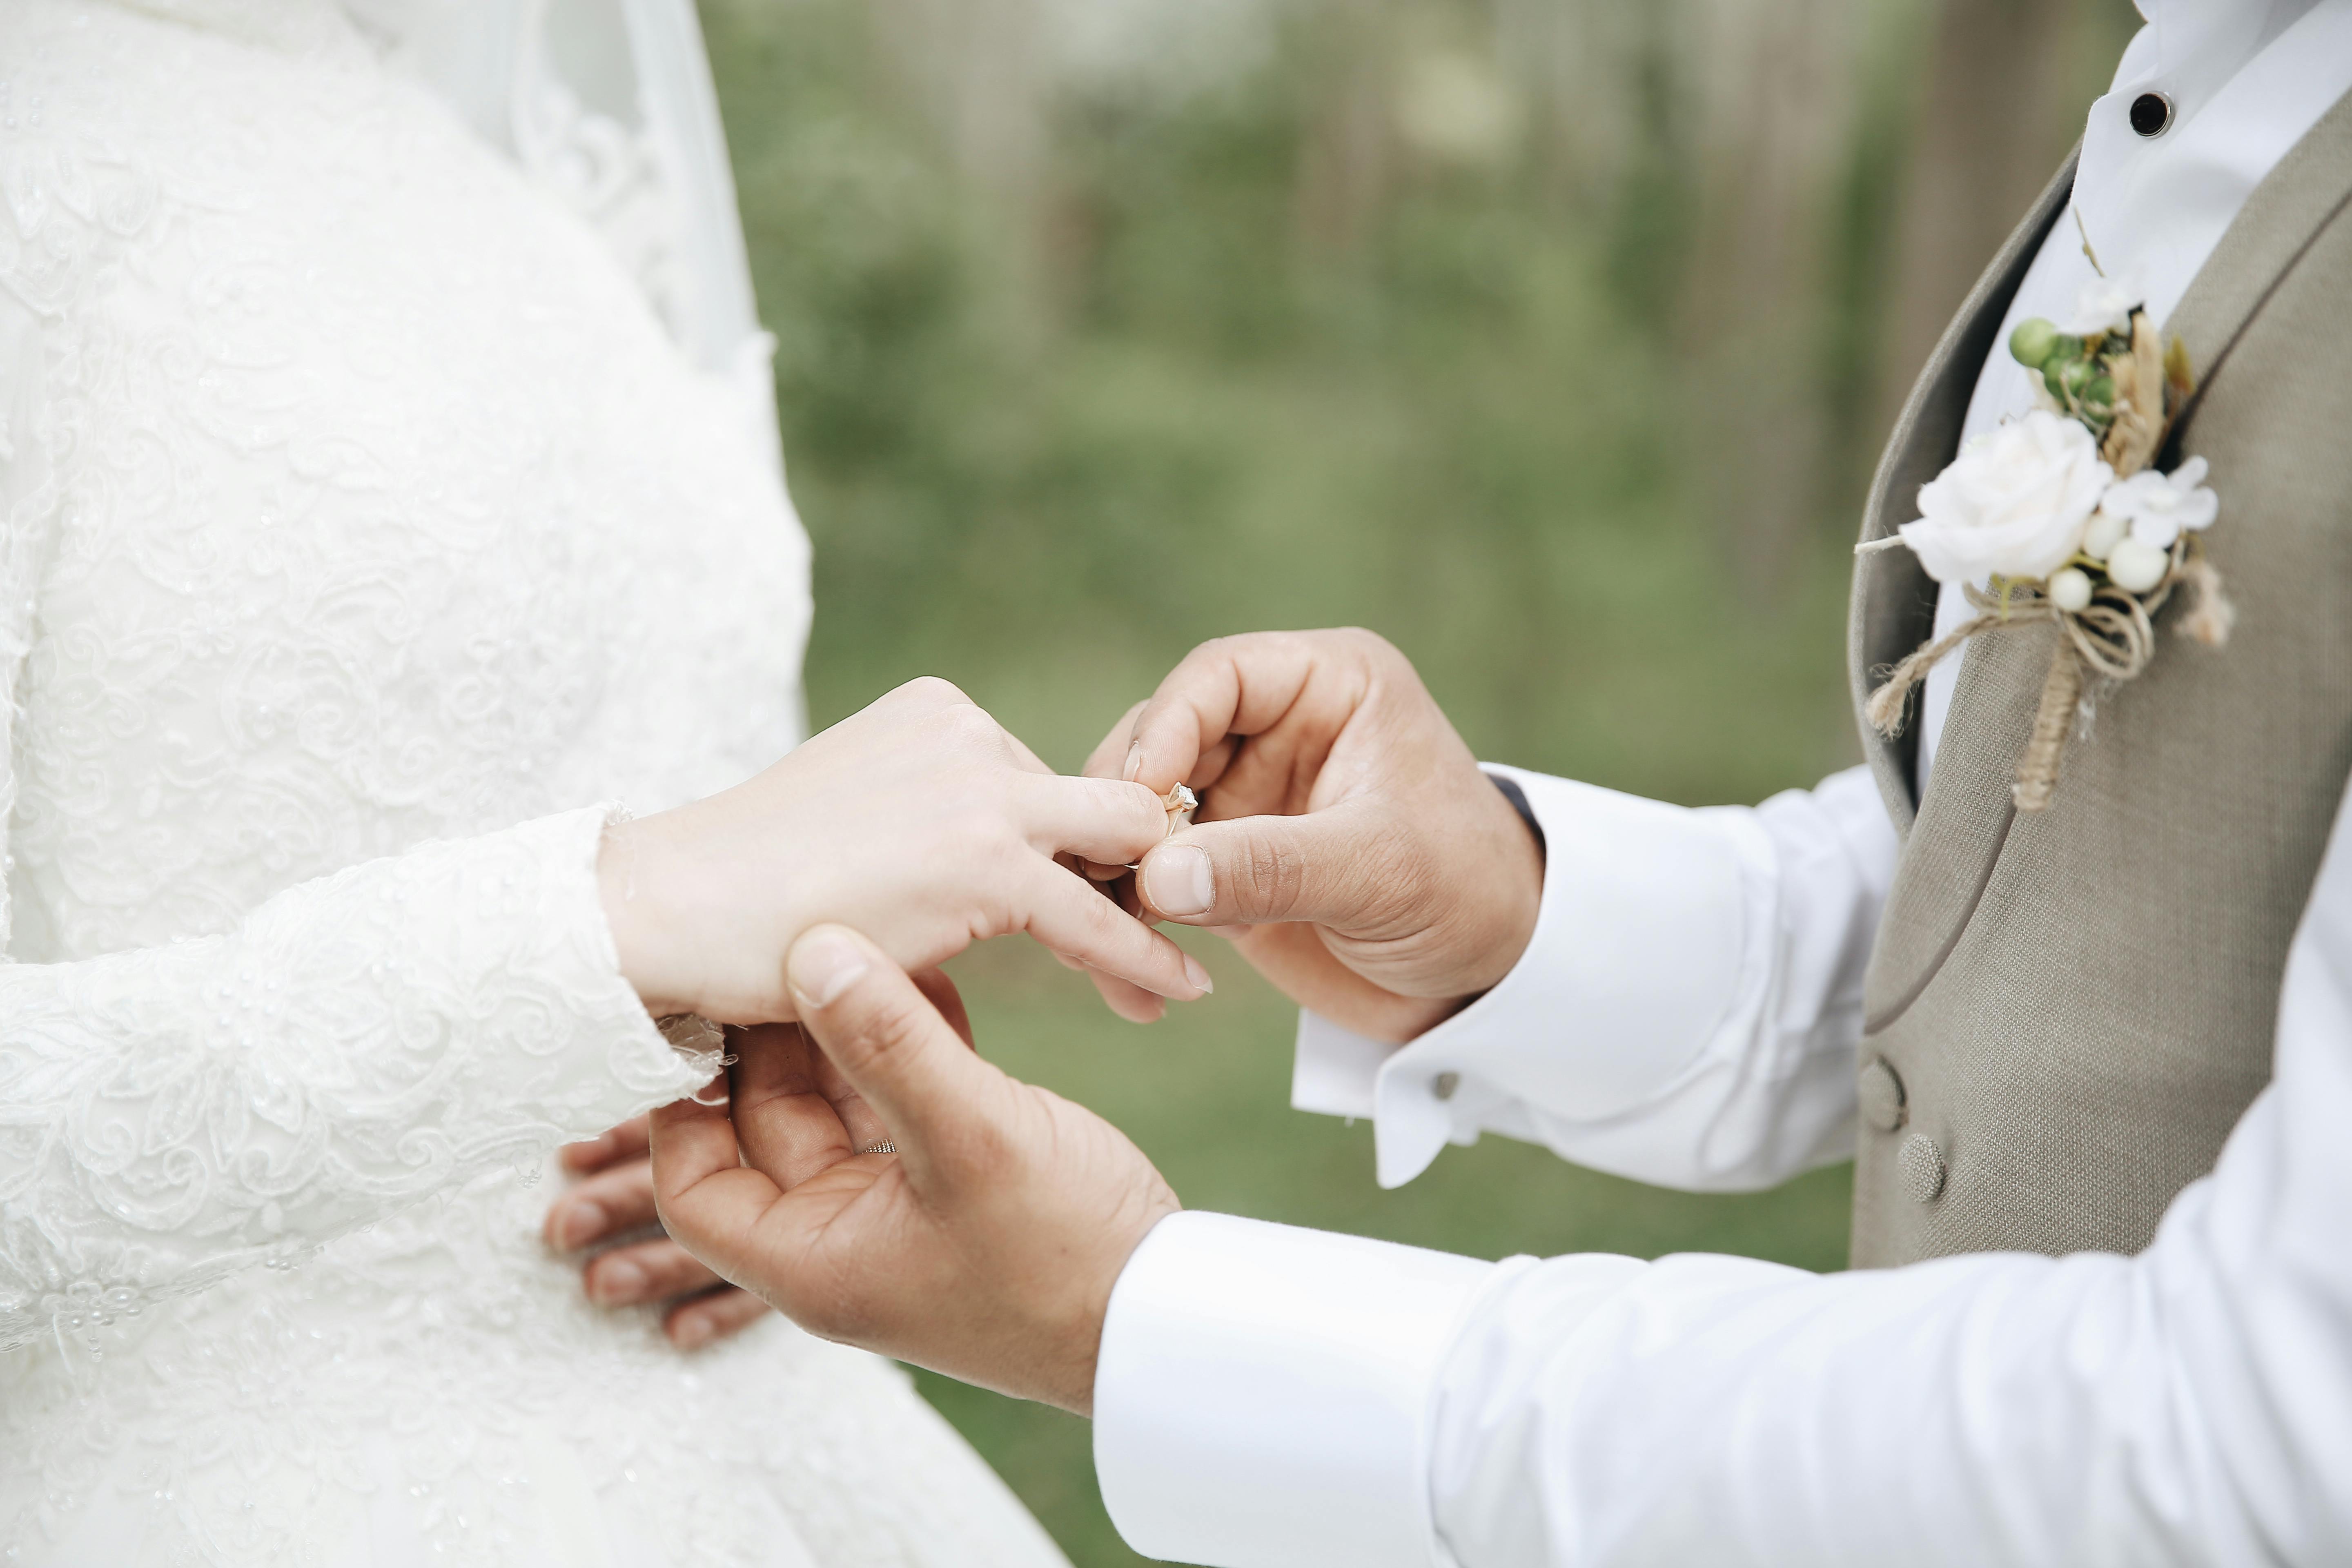 A man placing a wedding ring on a woman's finger | Source: Pexels